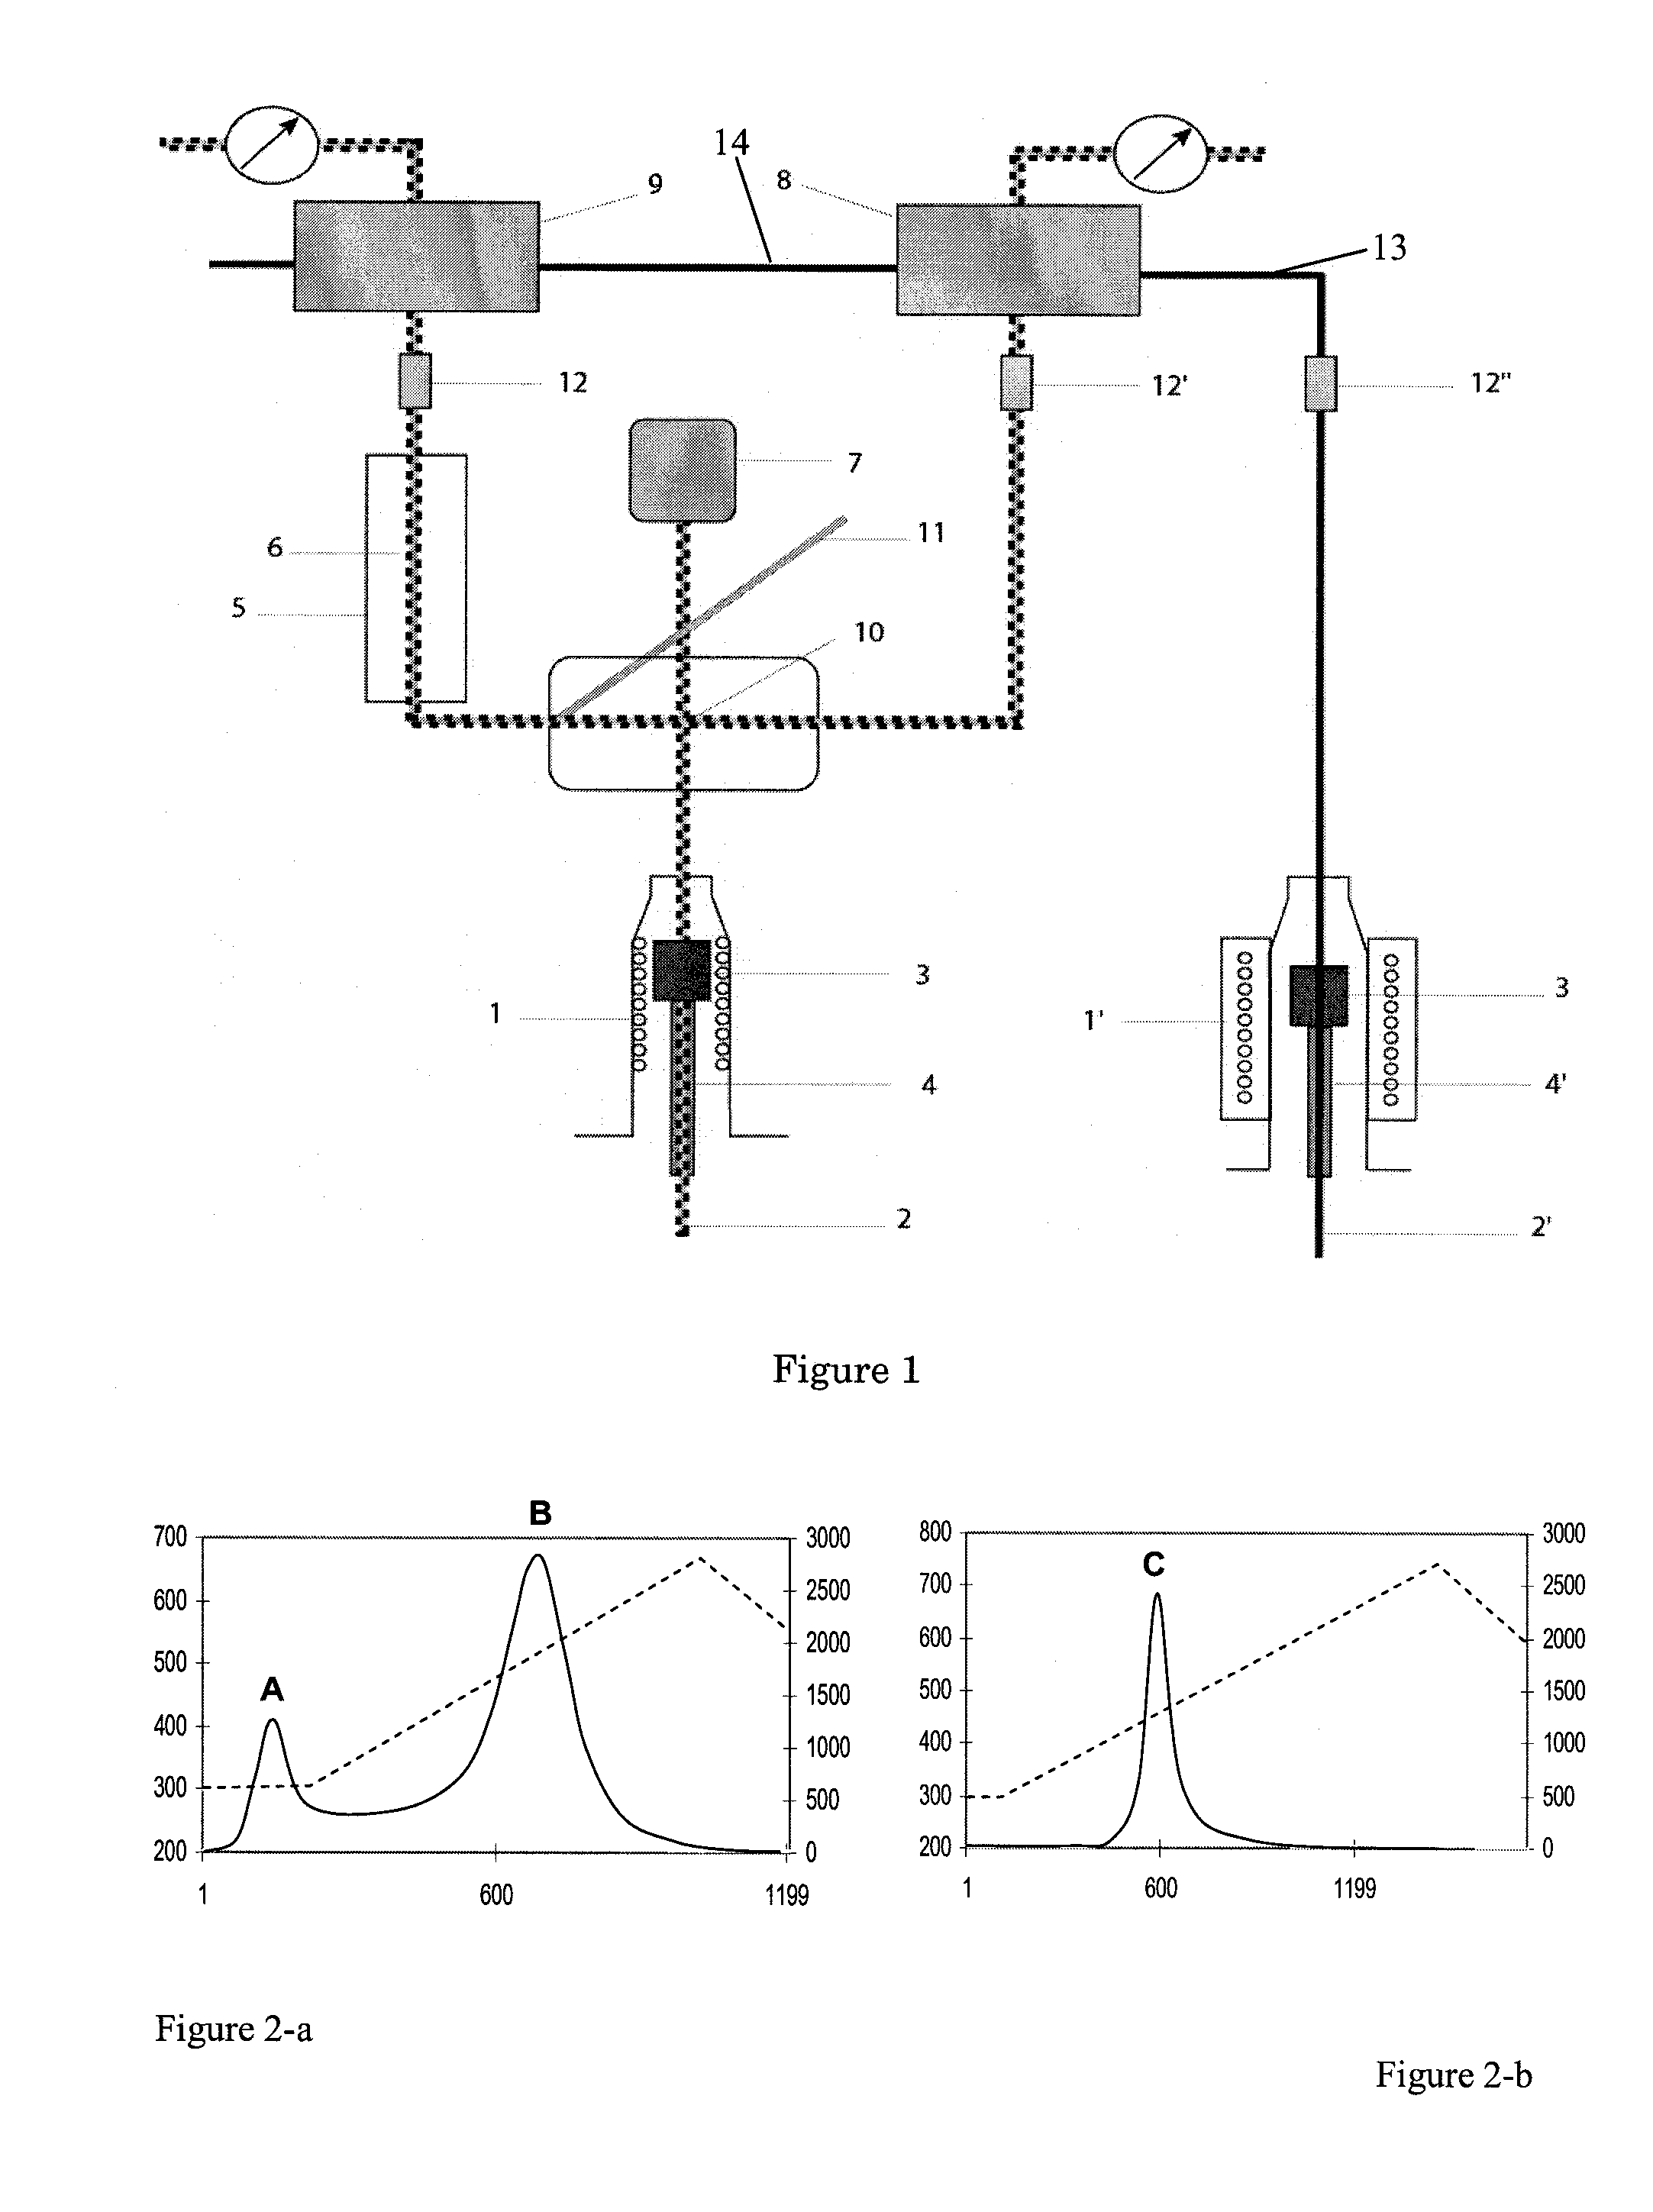 Method and device for fast sulfur characterization and quantification in sedimentary rocks and petroleum products